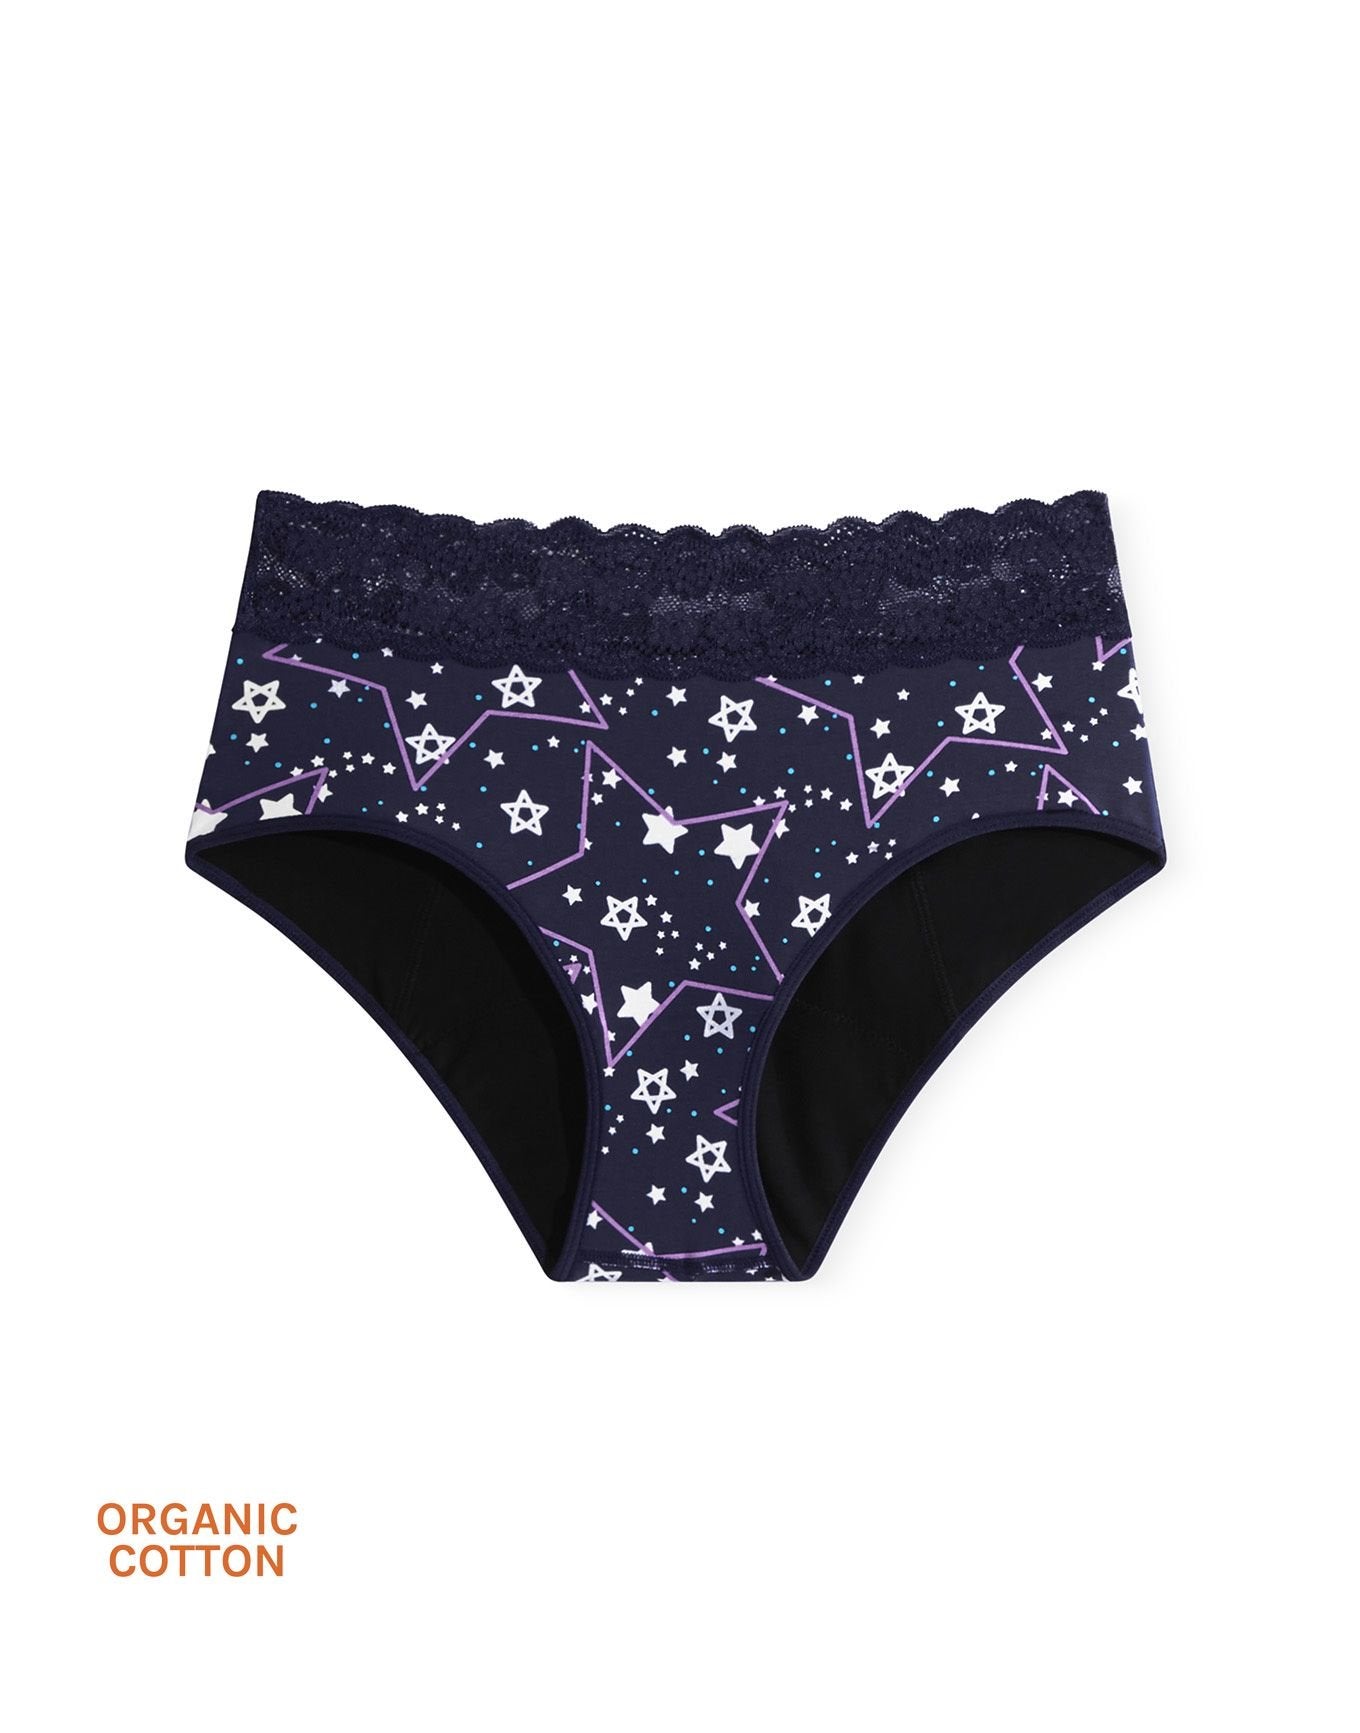 Period Starter Kit  2 Pairs of Period Undies Perfect For Tweens